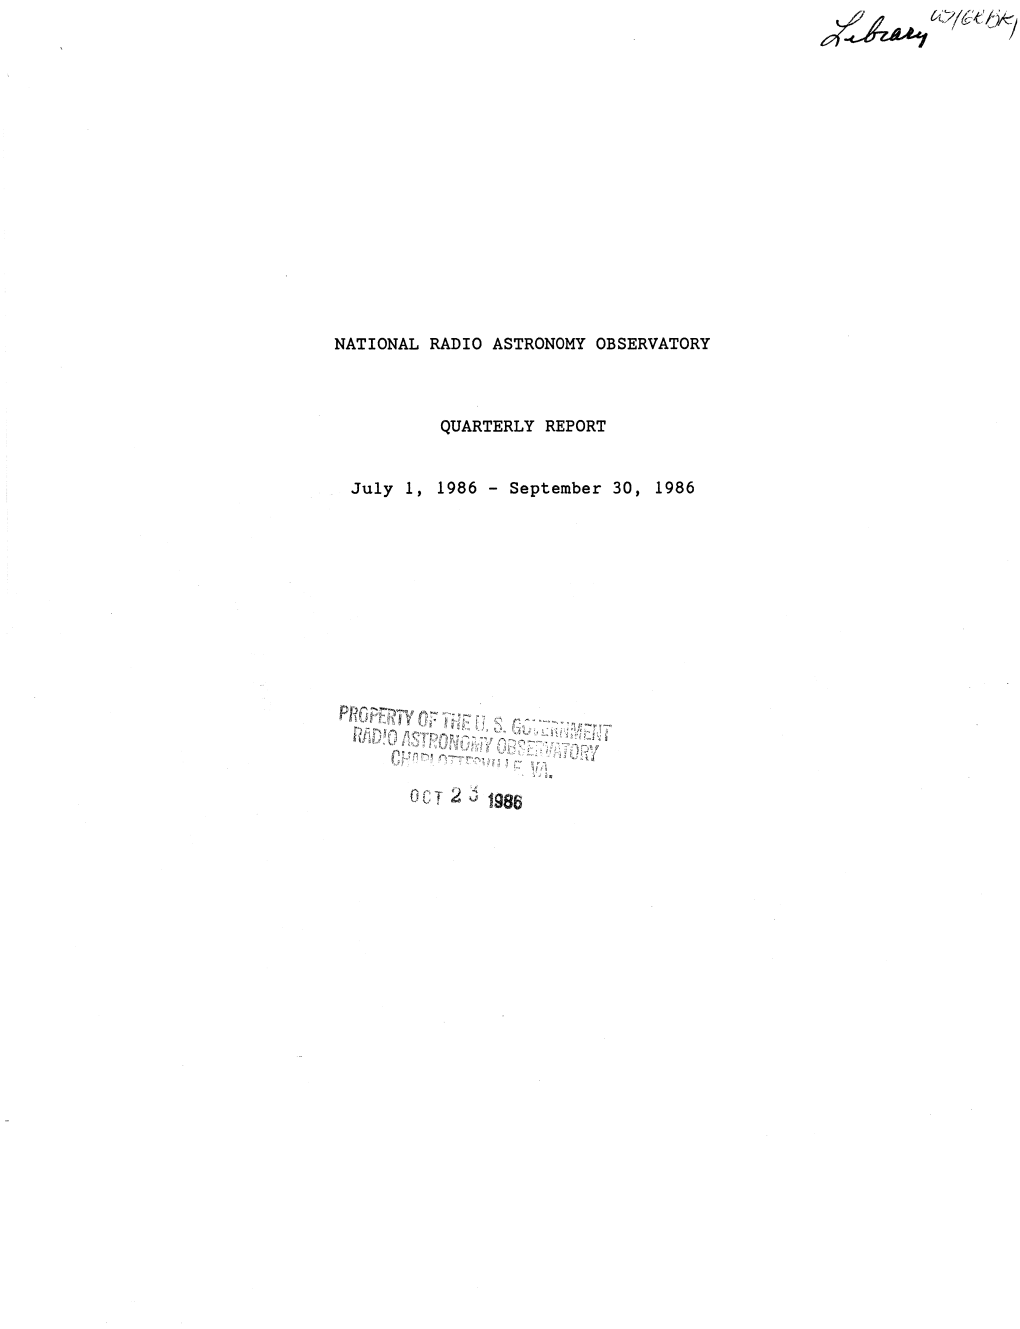 NATIONAL RADIO ASTRONOMY OBSERVATORY QUARTERLY REPORT July 1, 1986